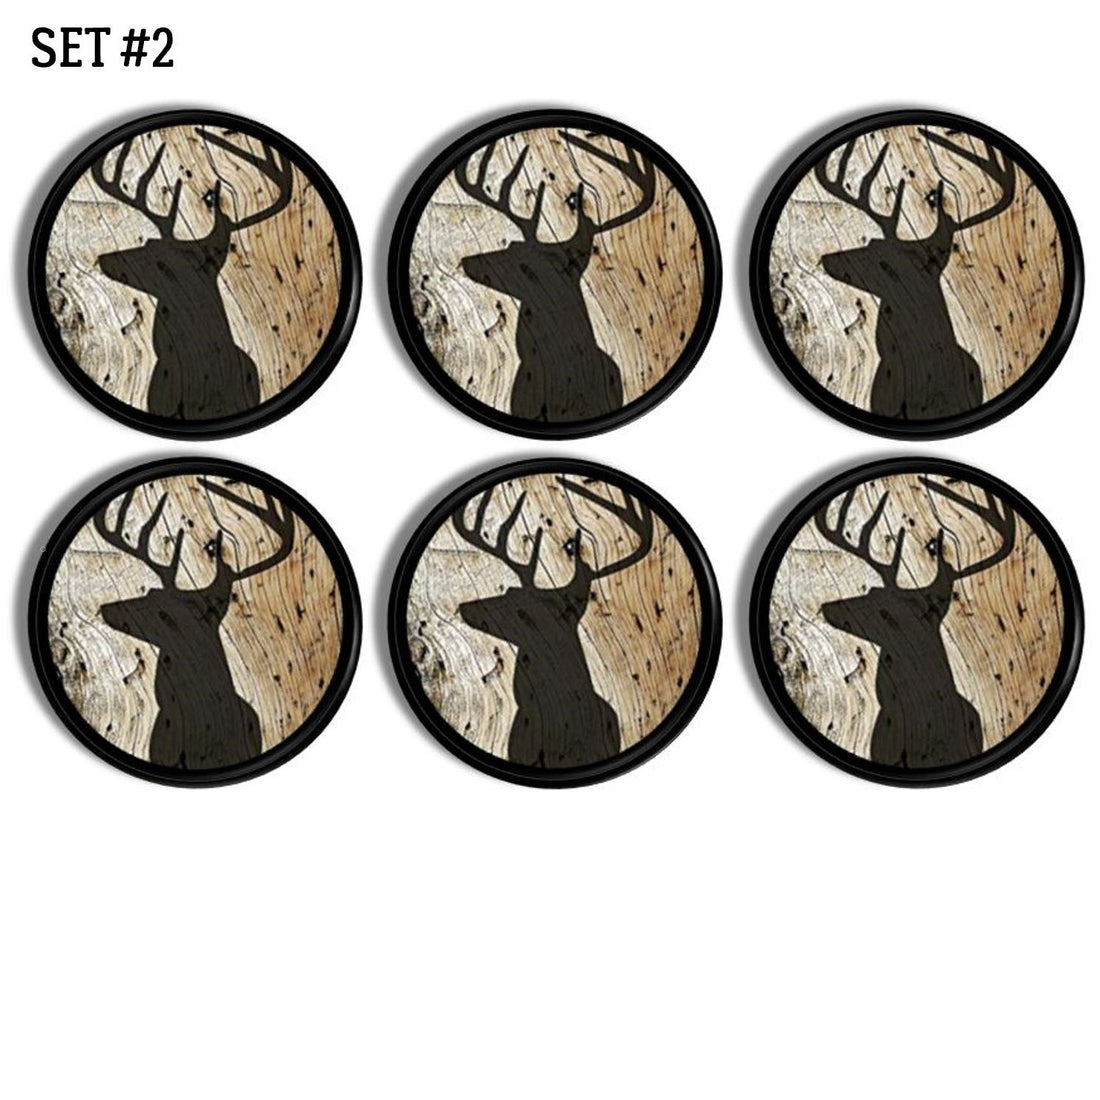 6 Buck theme dresser drawer pulls. Shadow of stag with antlers on rustic distressed woodgrain. Deer hunting knobs for man cave cabinet, home bar cupboard or furntiture.